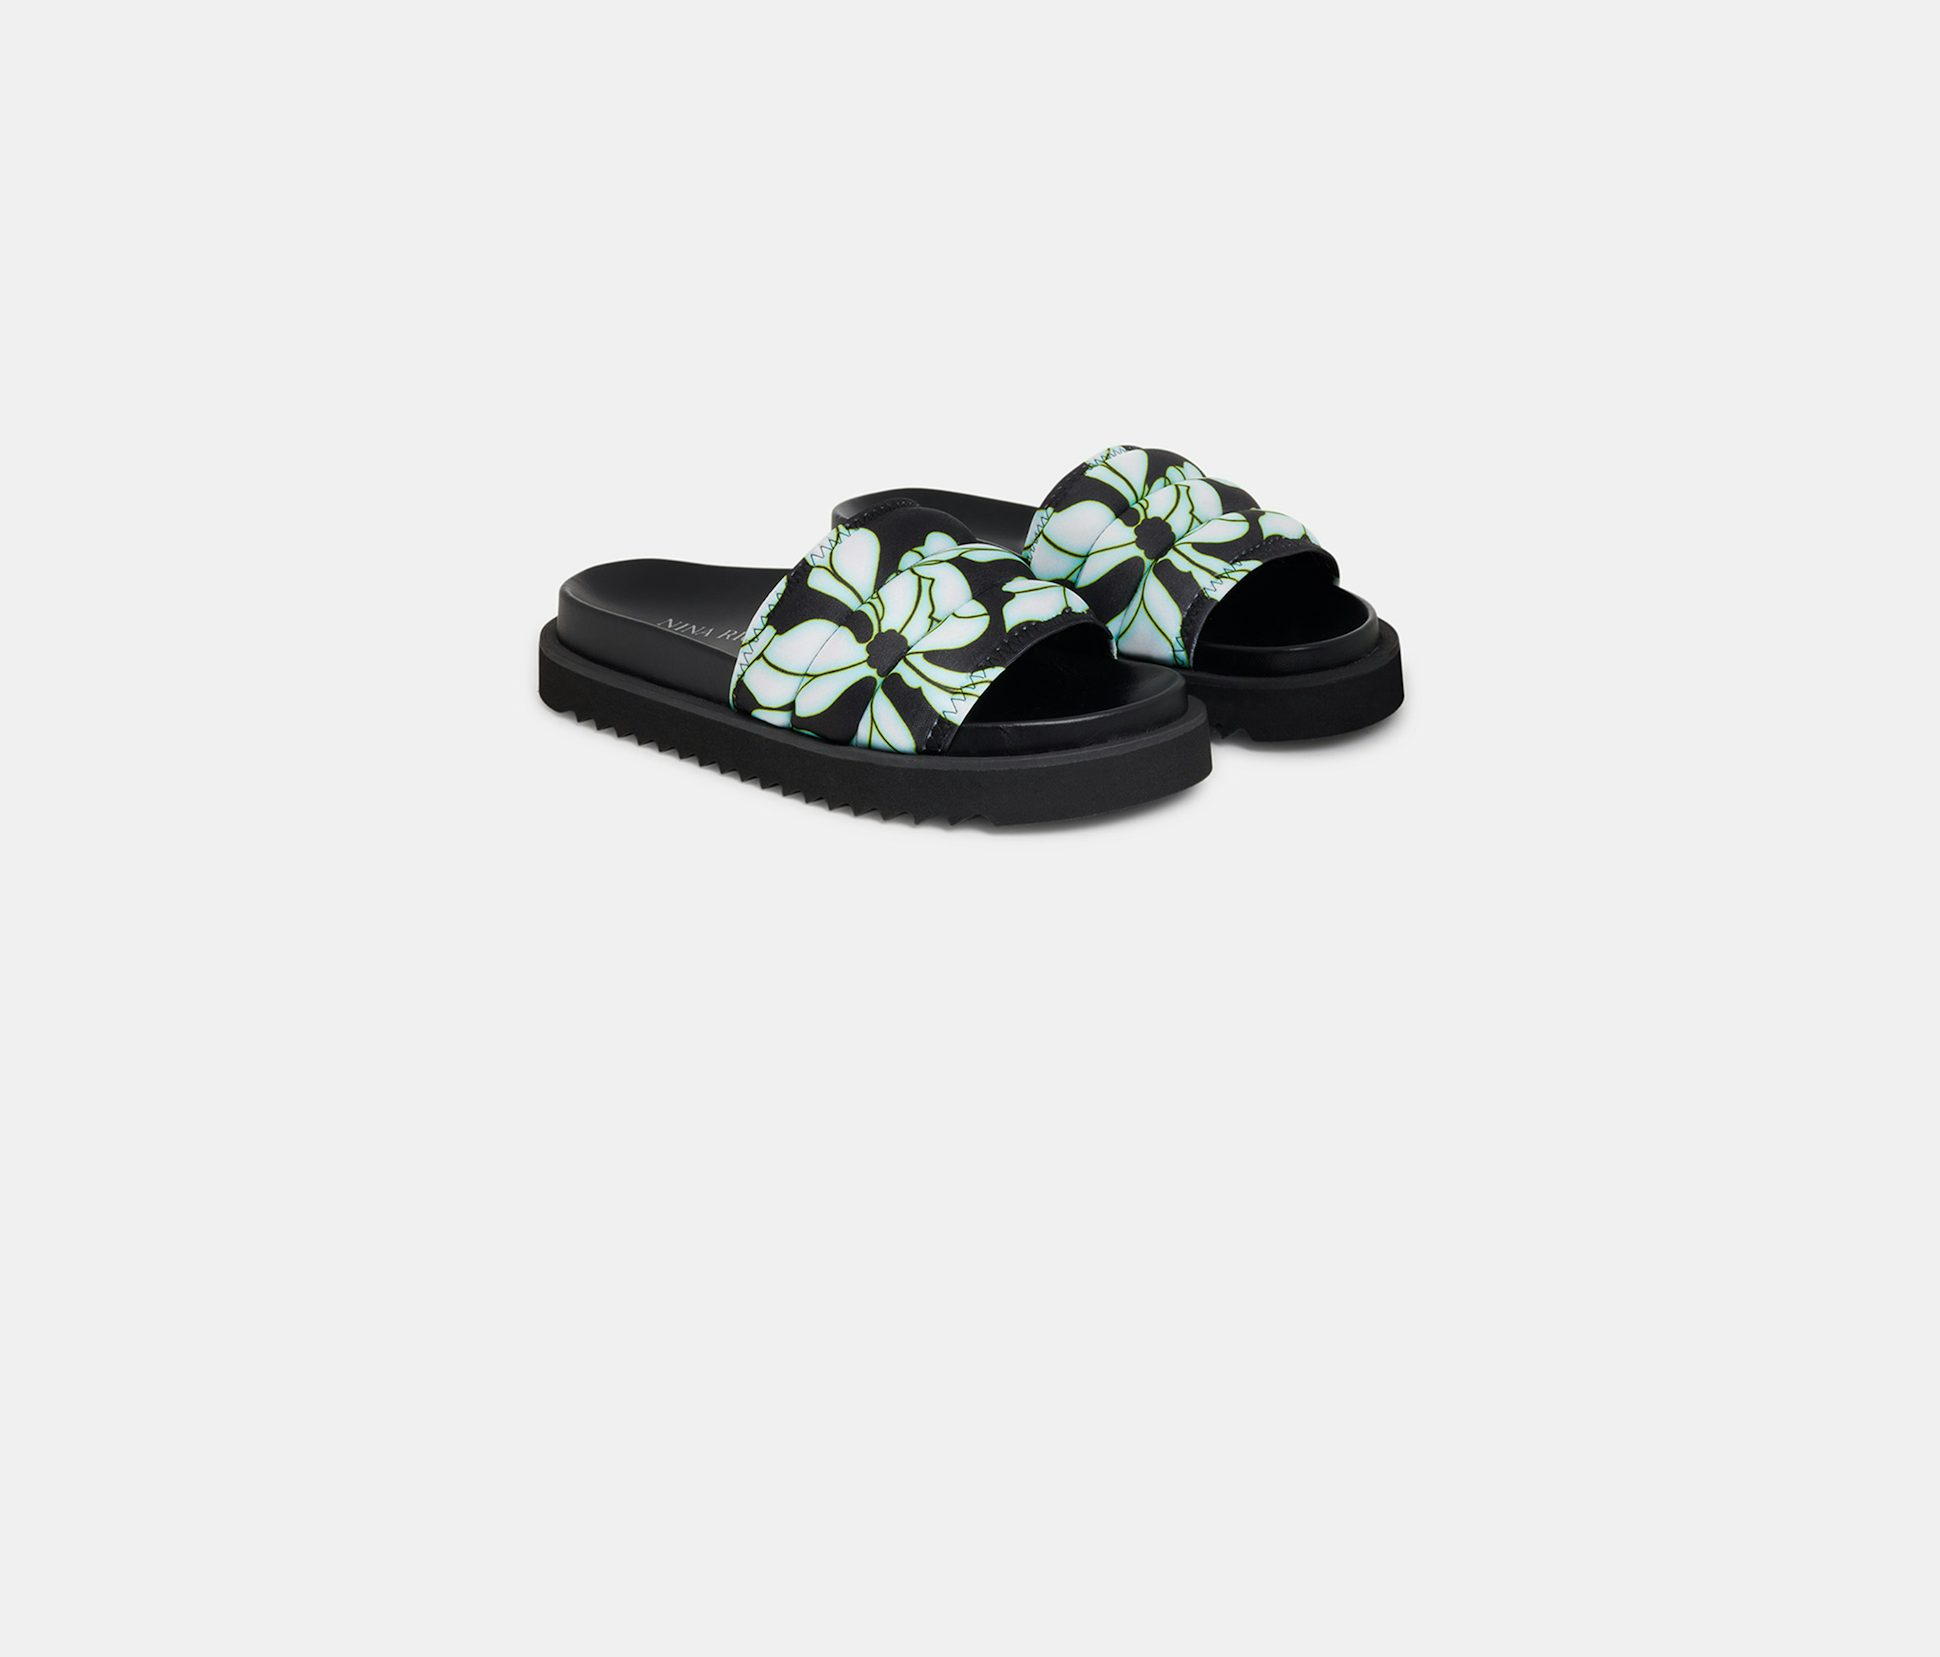 Quilted Water Green and Black Printed Neoprene Slides with Leather Sole - Nina Ricci